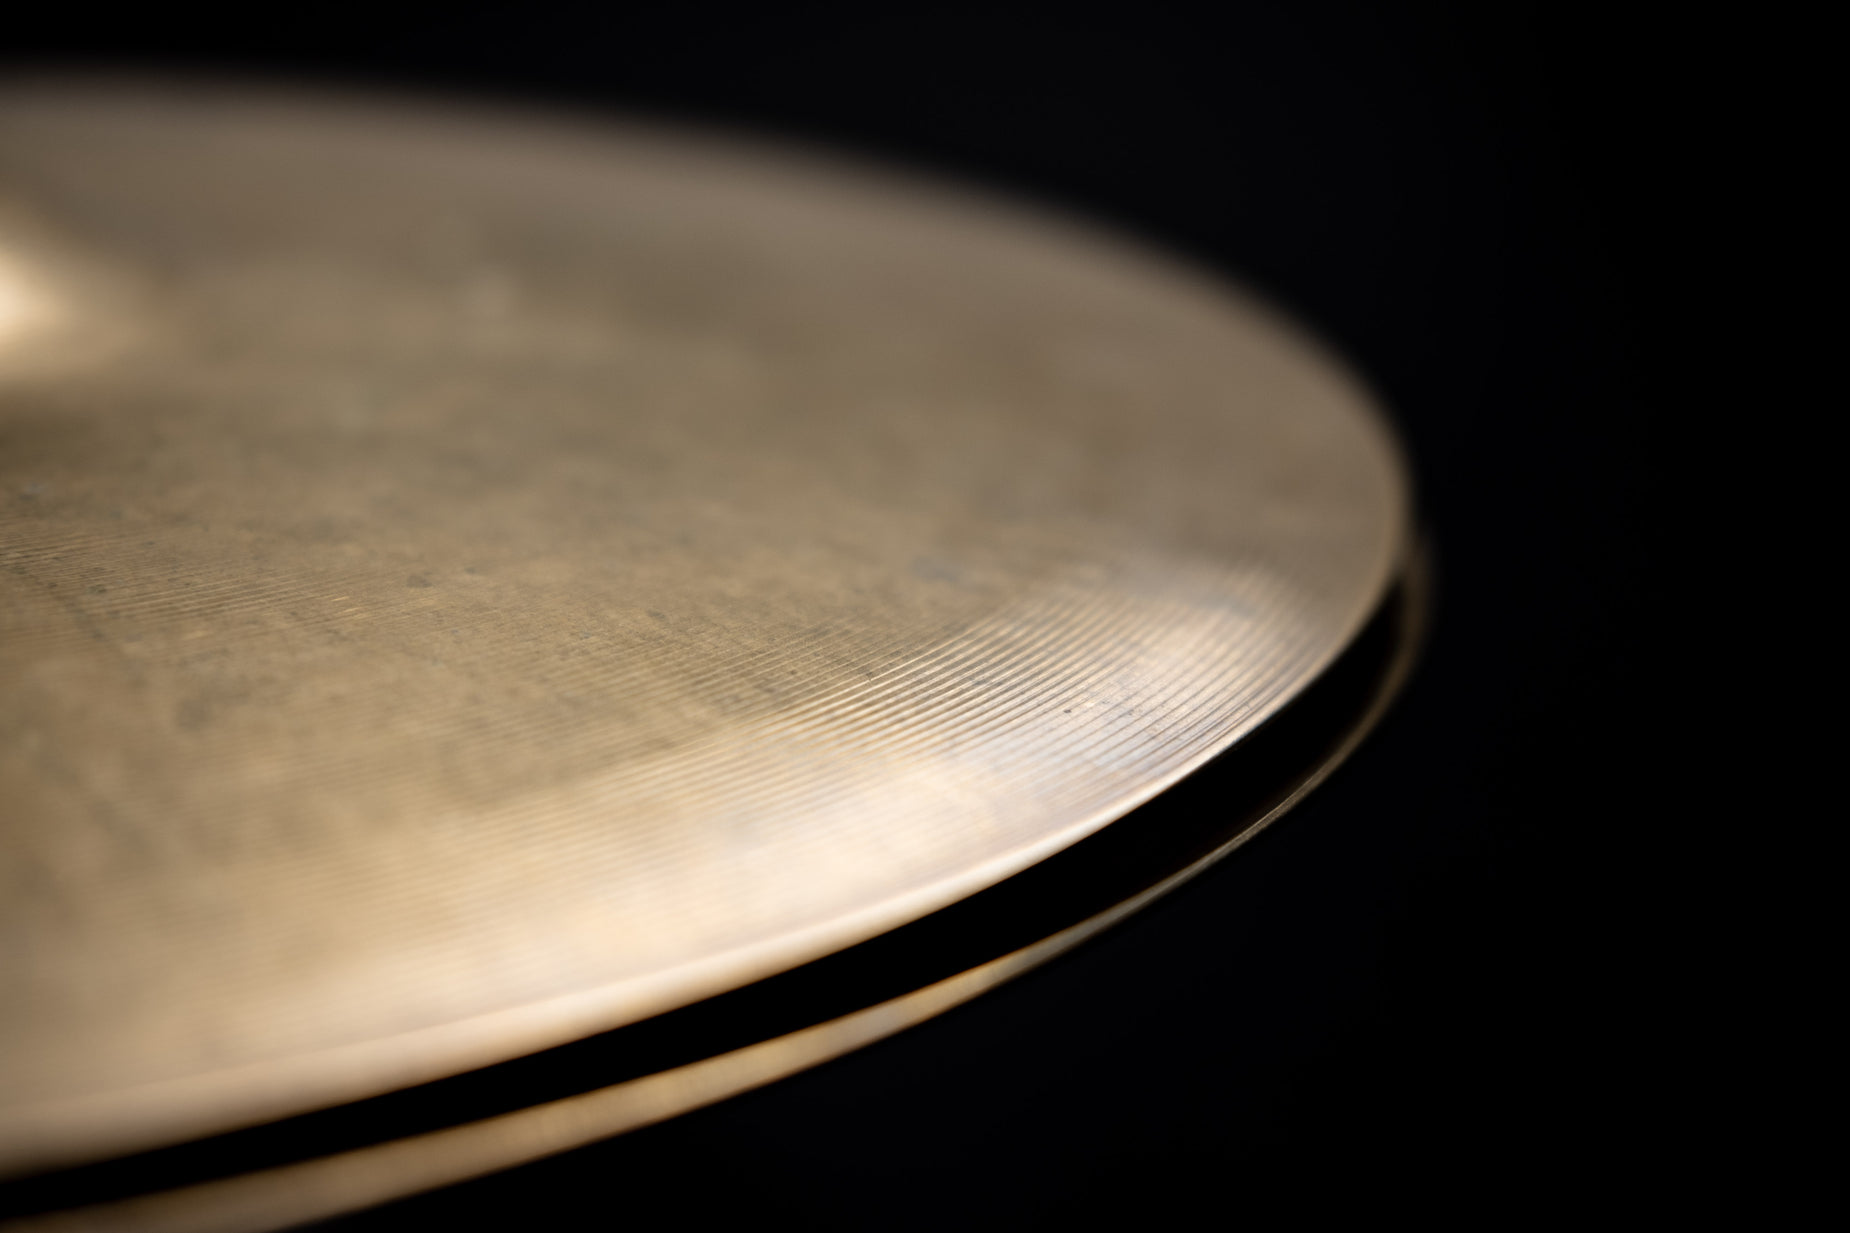 a close up image of a silver plate